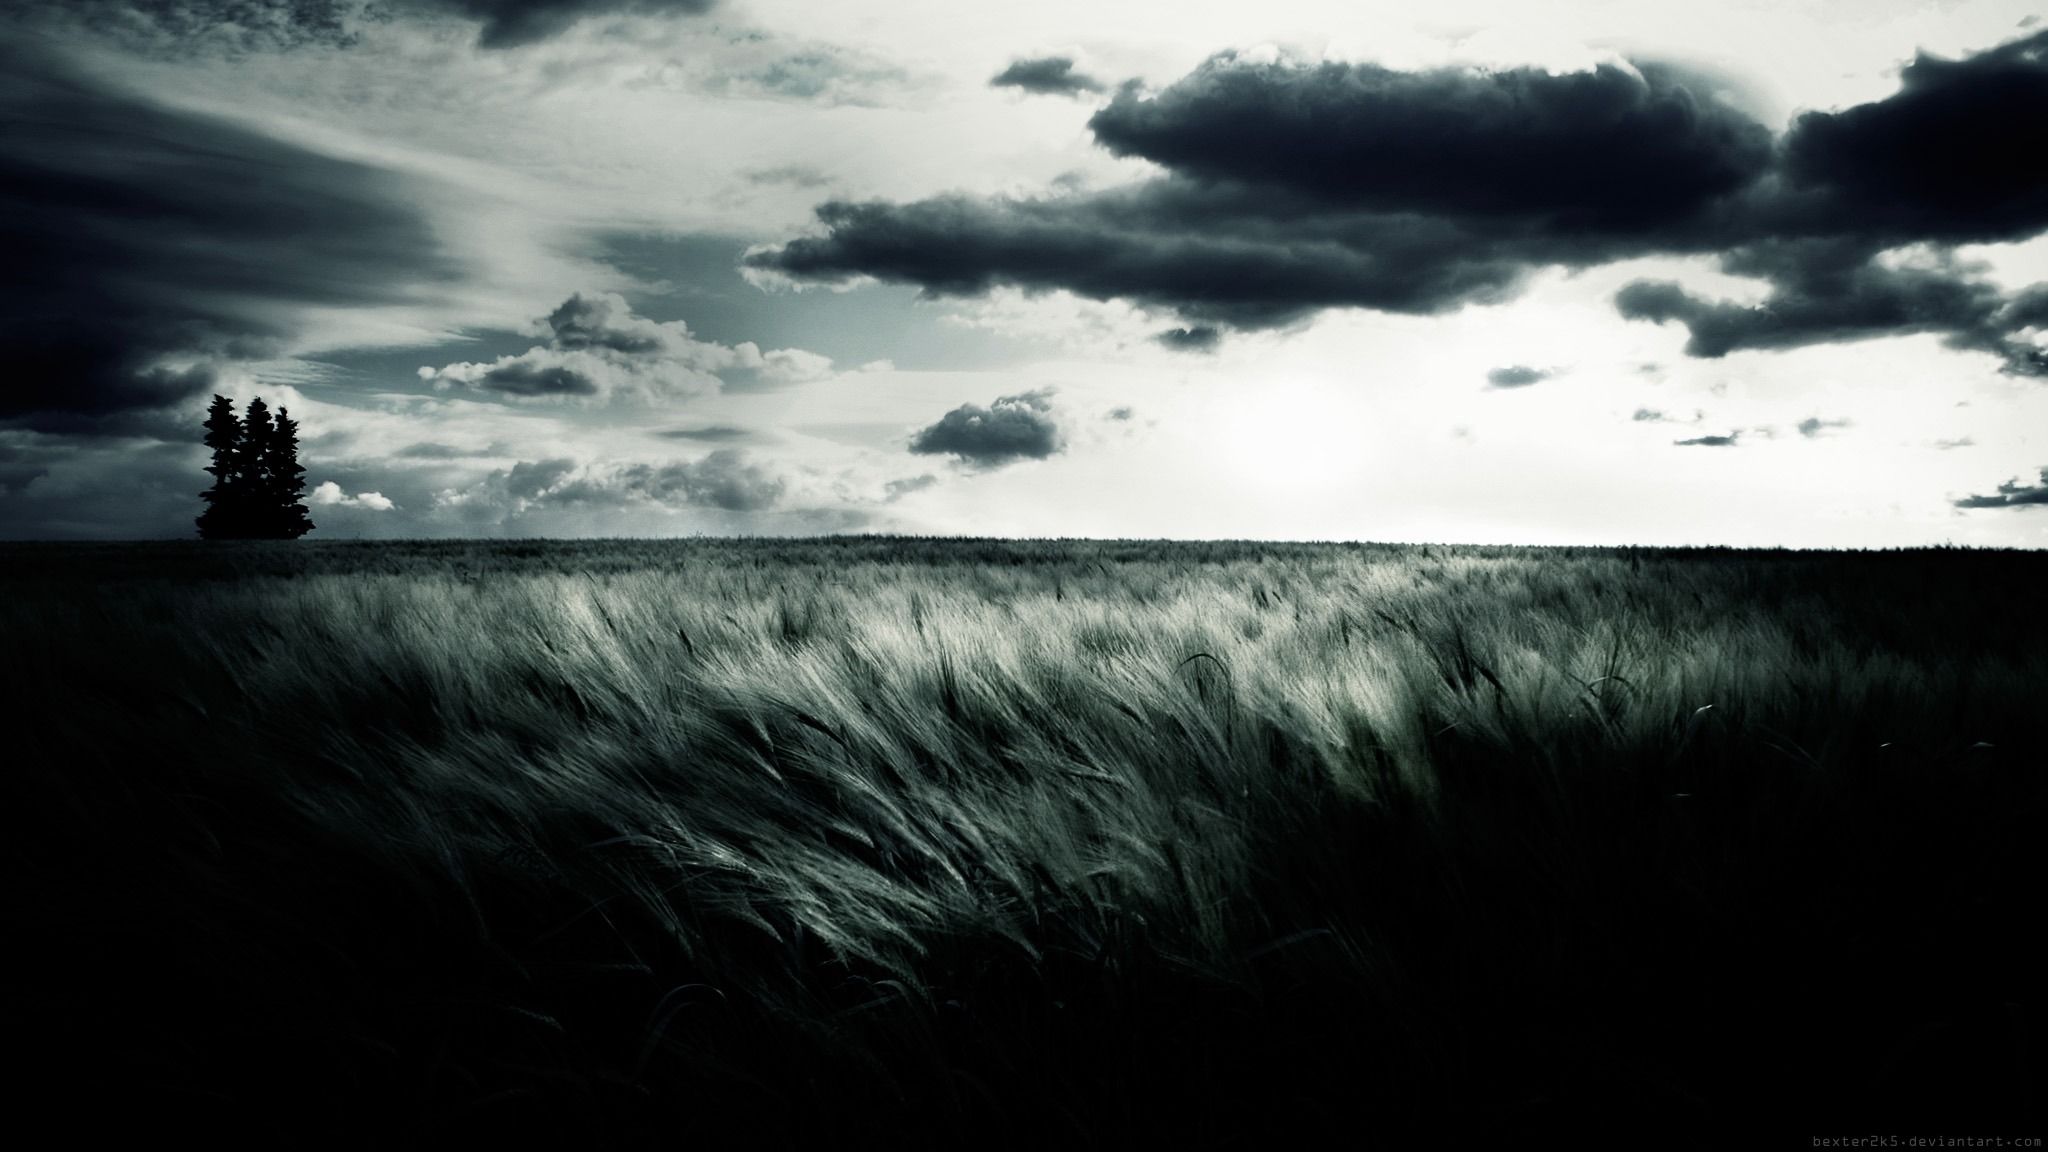 hd wallpaper abstract black and white nature fields wallpapers Car 2048x1152